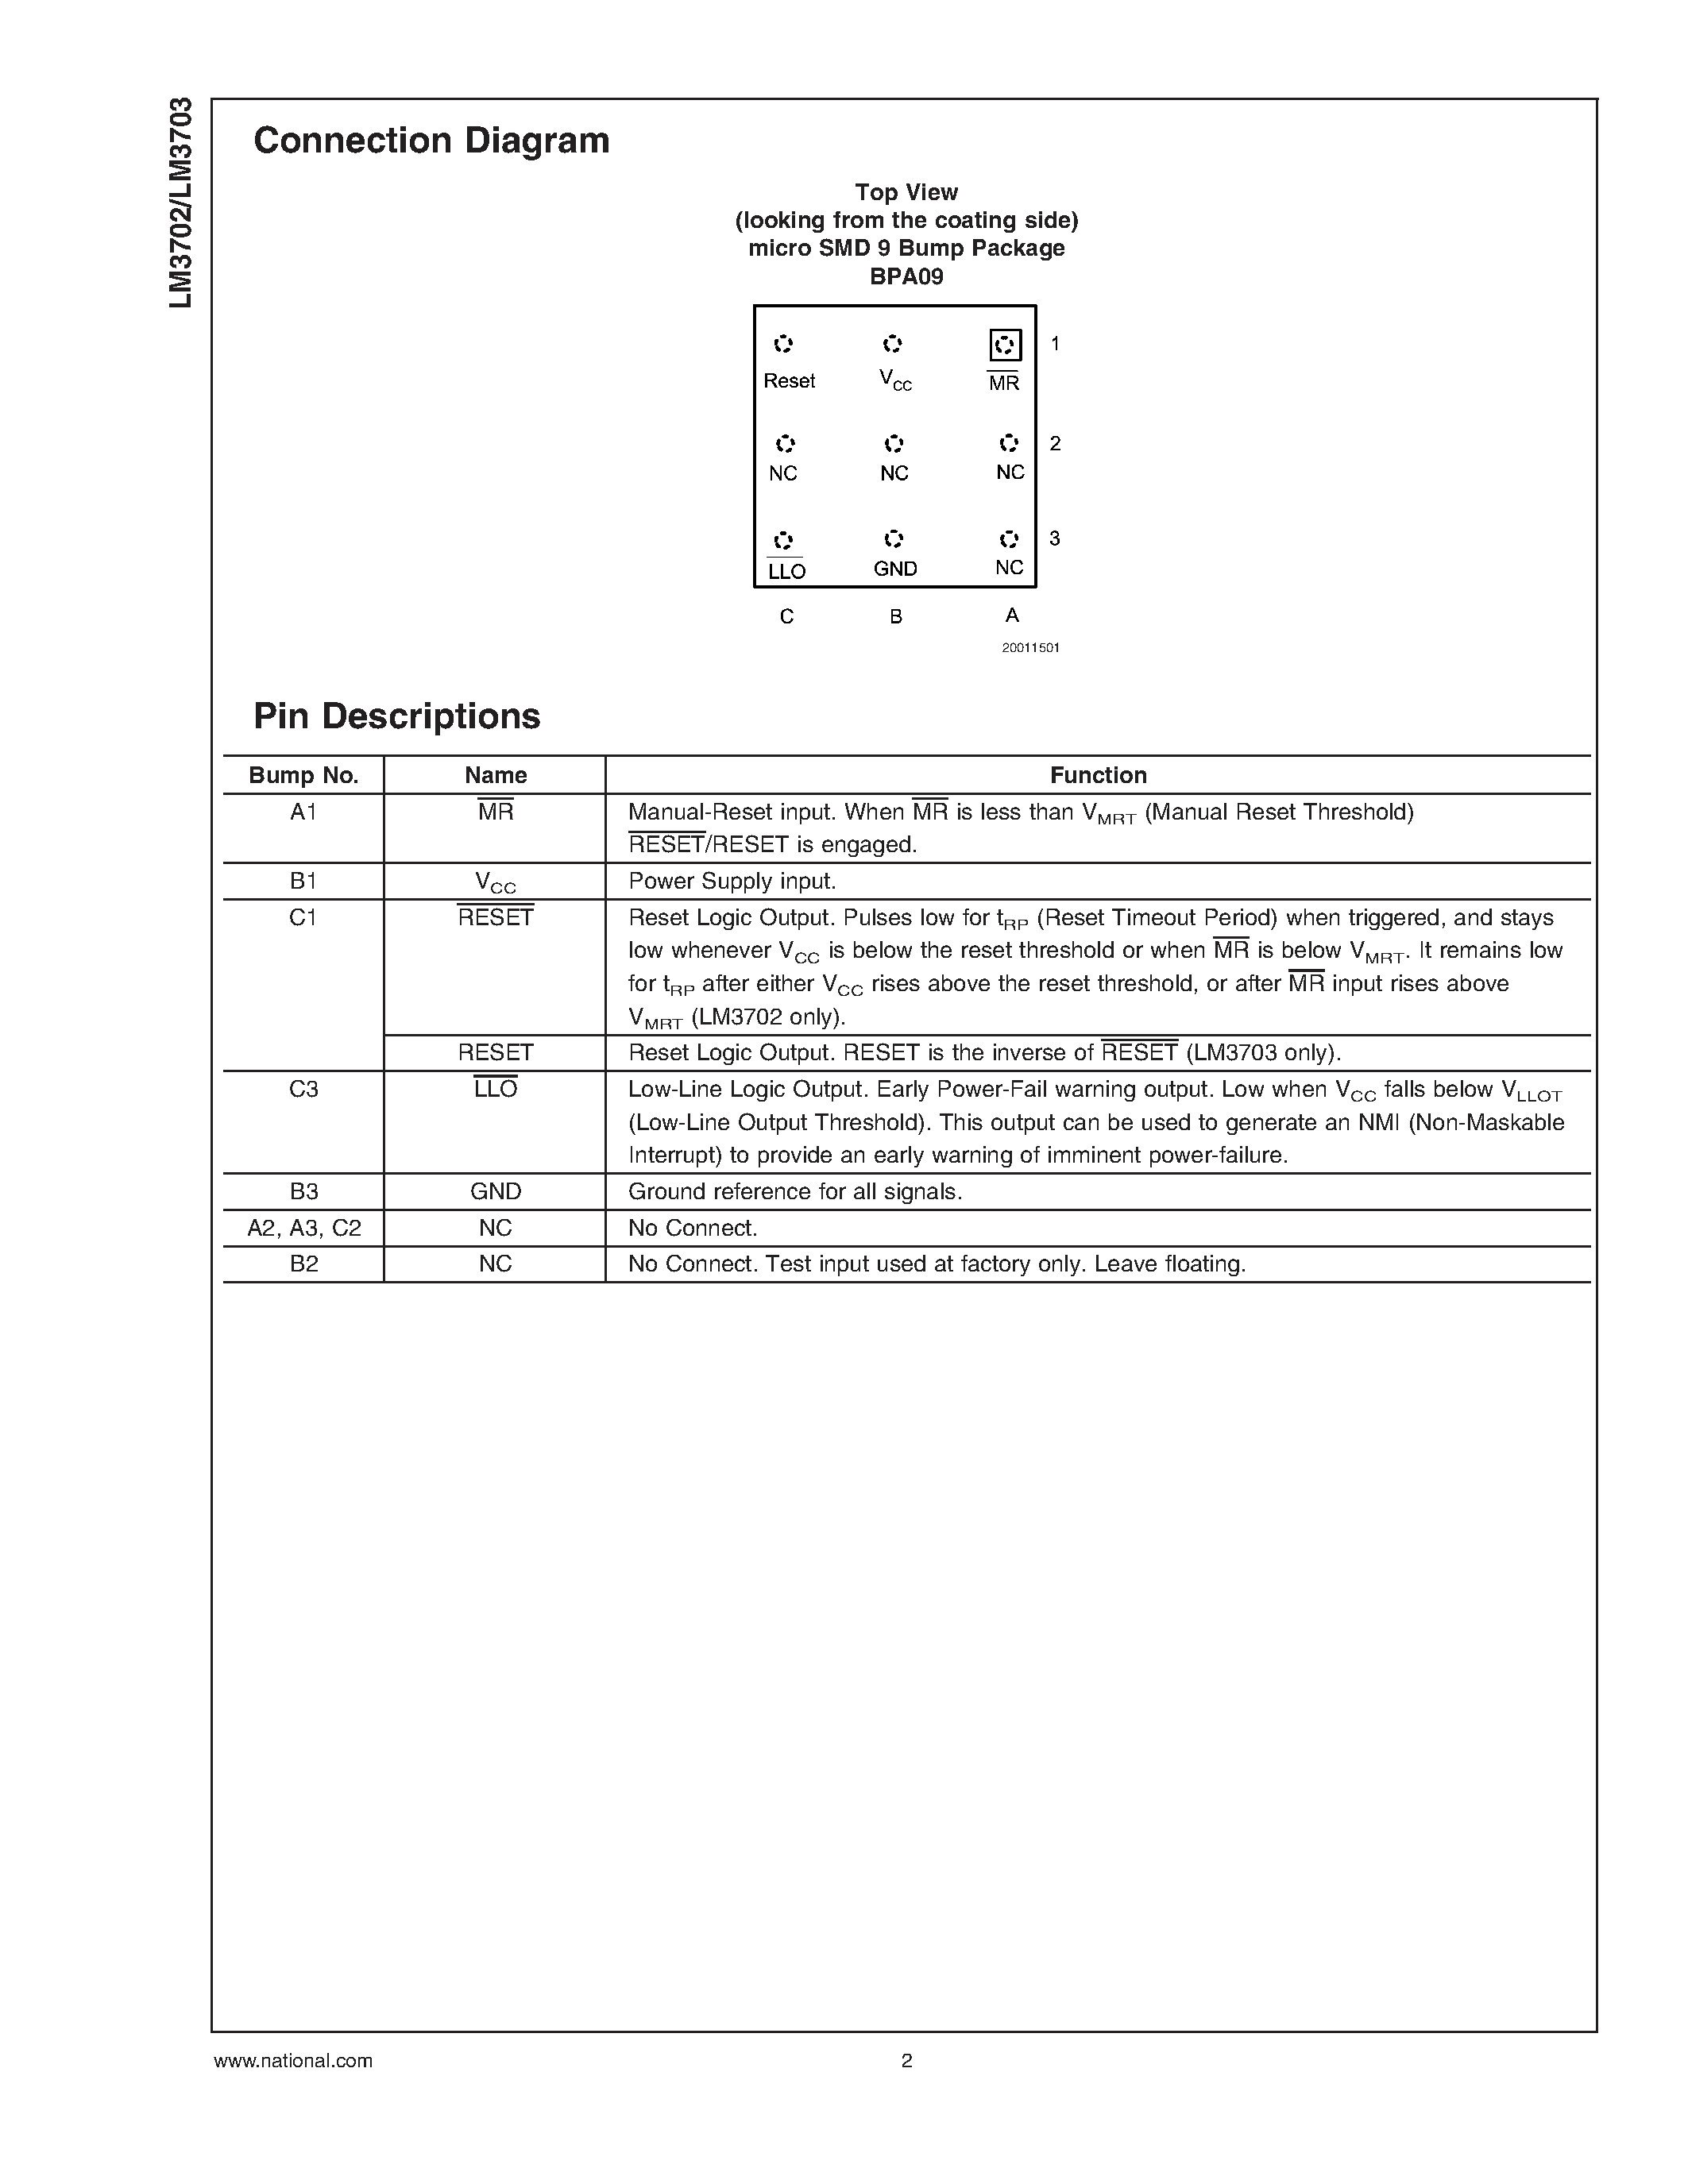 Datasheet LM3702 - (LM3702 / LM3703) Microprocessor Supervisory Circuits page 2